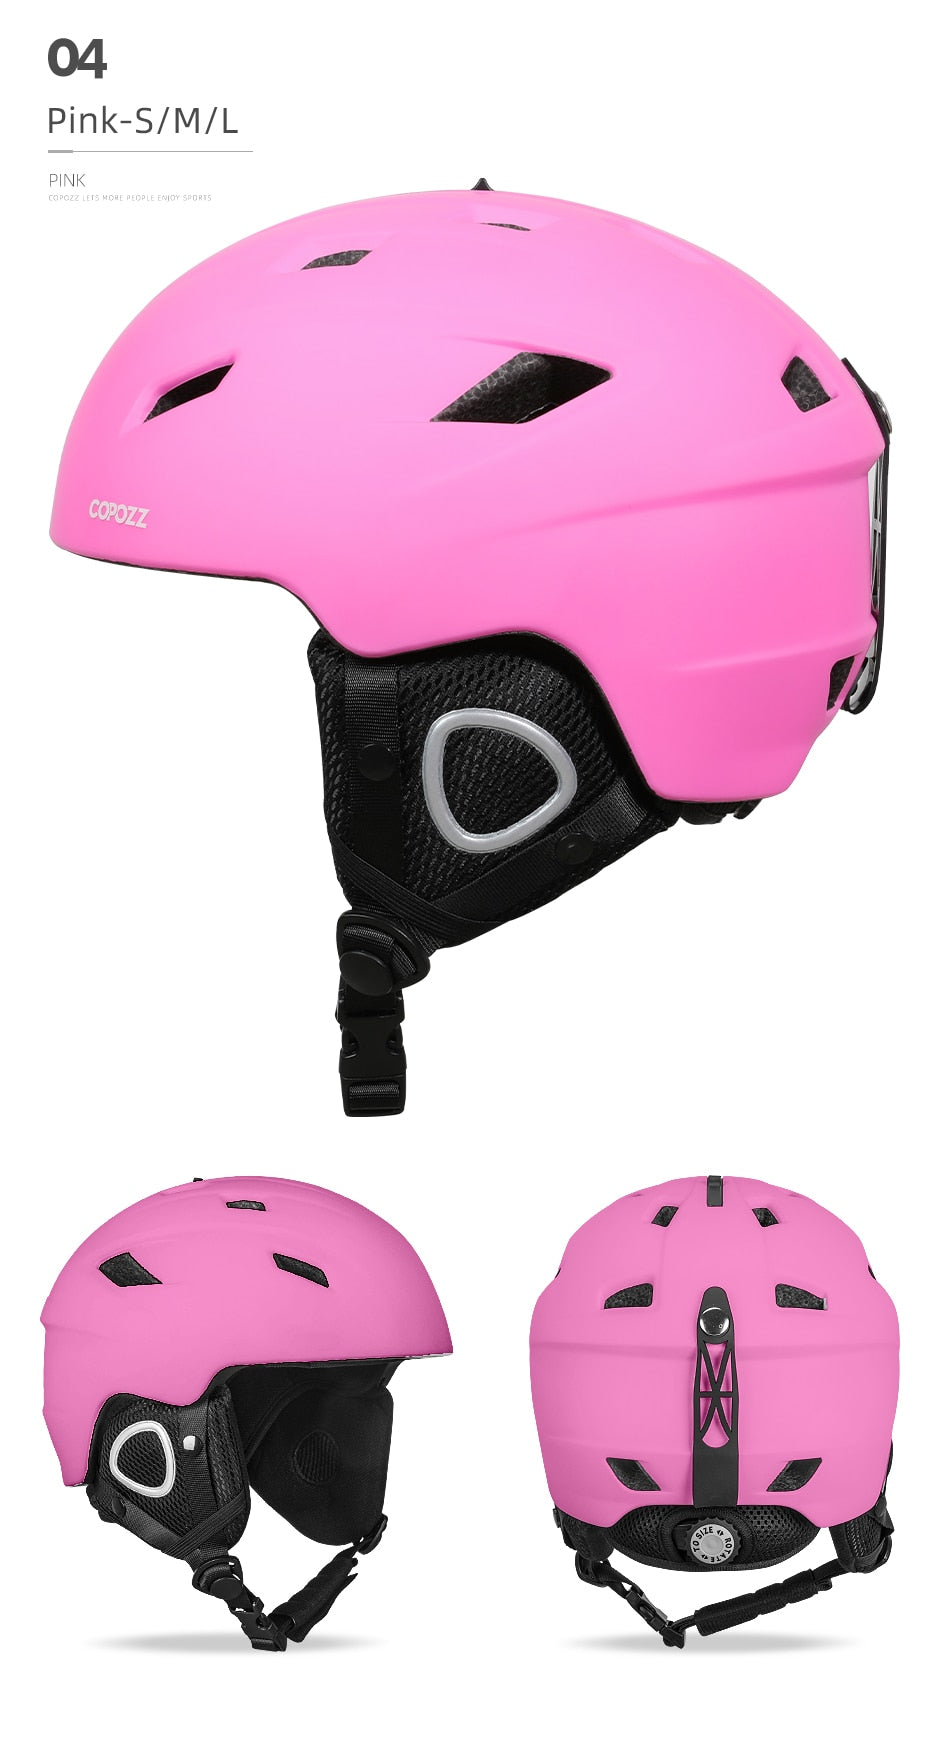 Helmet with Safety Integrally